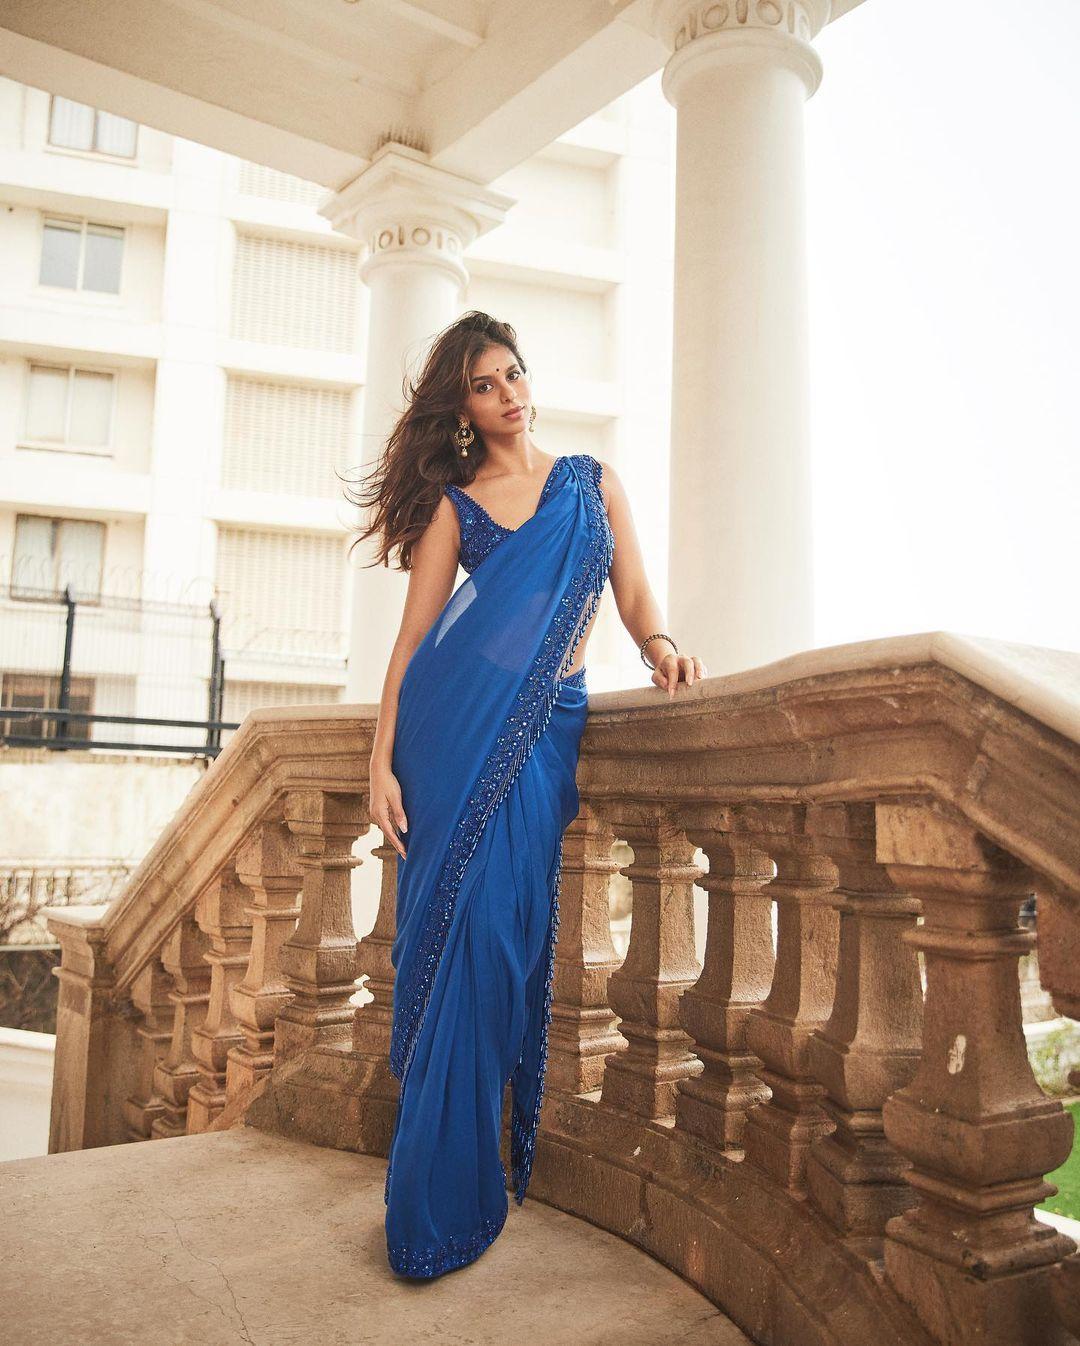 Suhana Khan's blue shimmer saree, nude makeup, and open hair came together to create a stunning and unforgettable presence, capturing the essence of both elegance and tradition